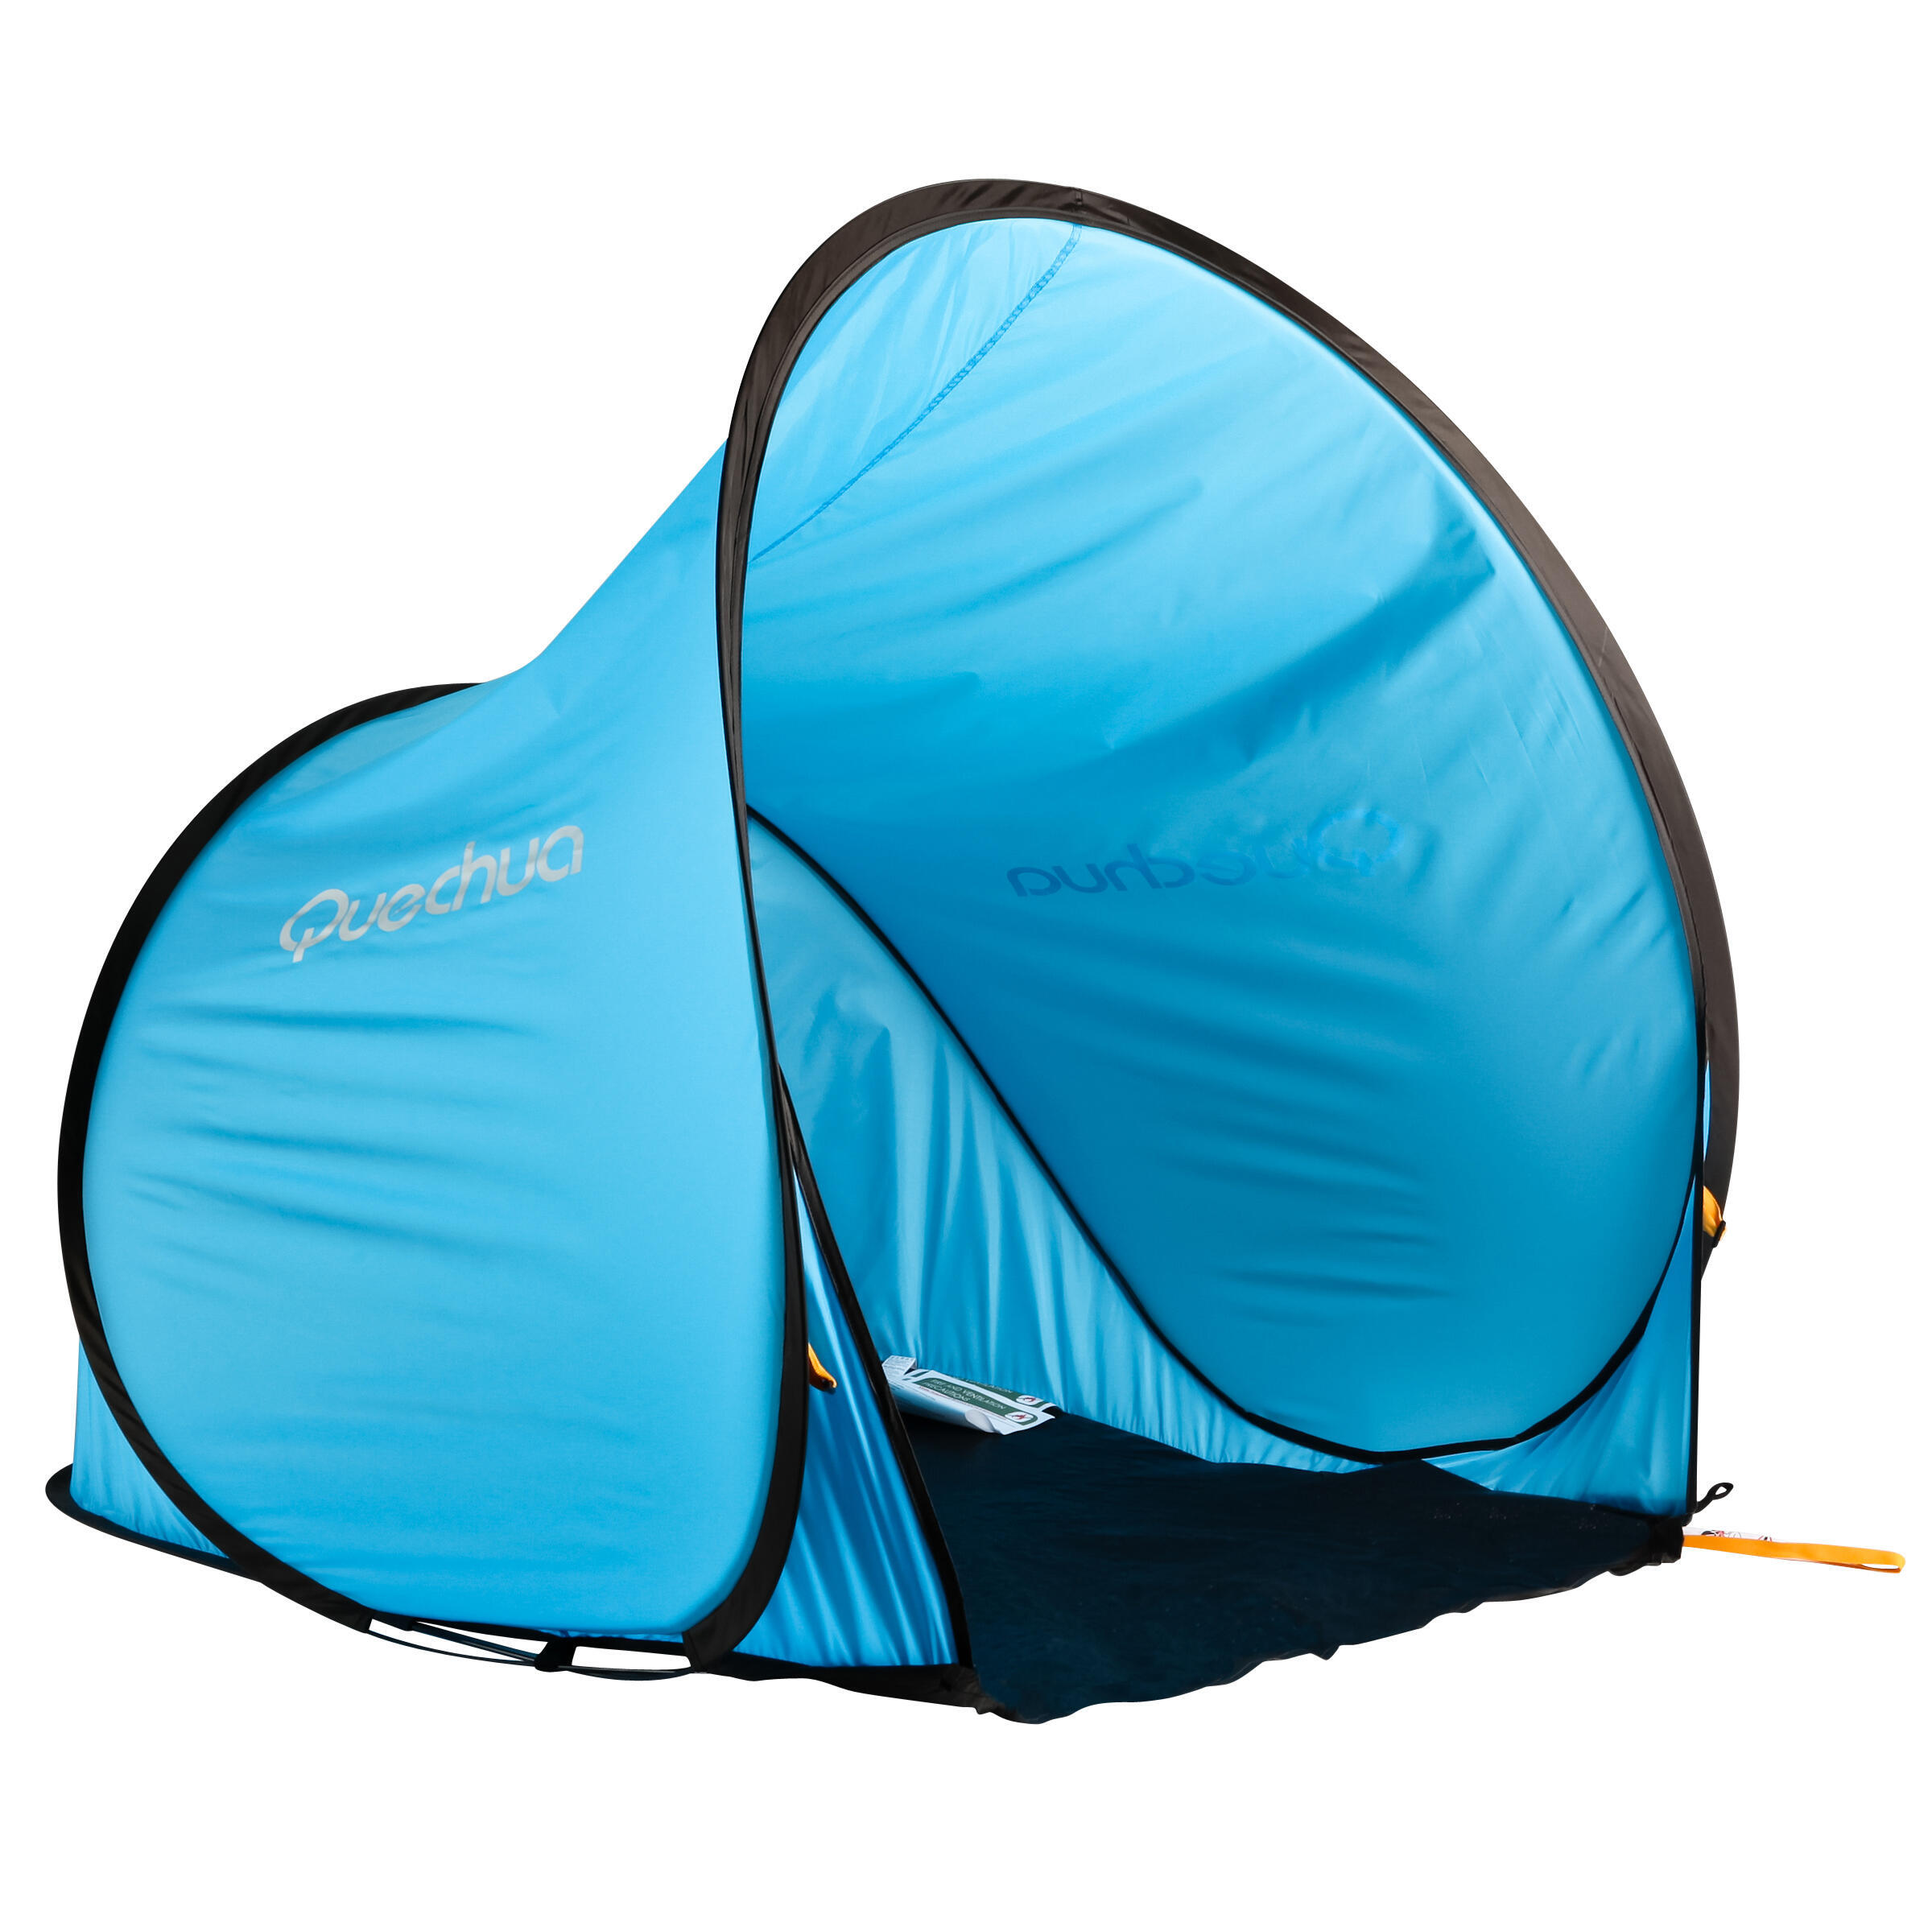 QUECHUA Instant camping shelter - 1 adult or 2 children - 2 seconds 0